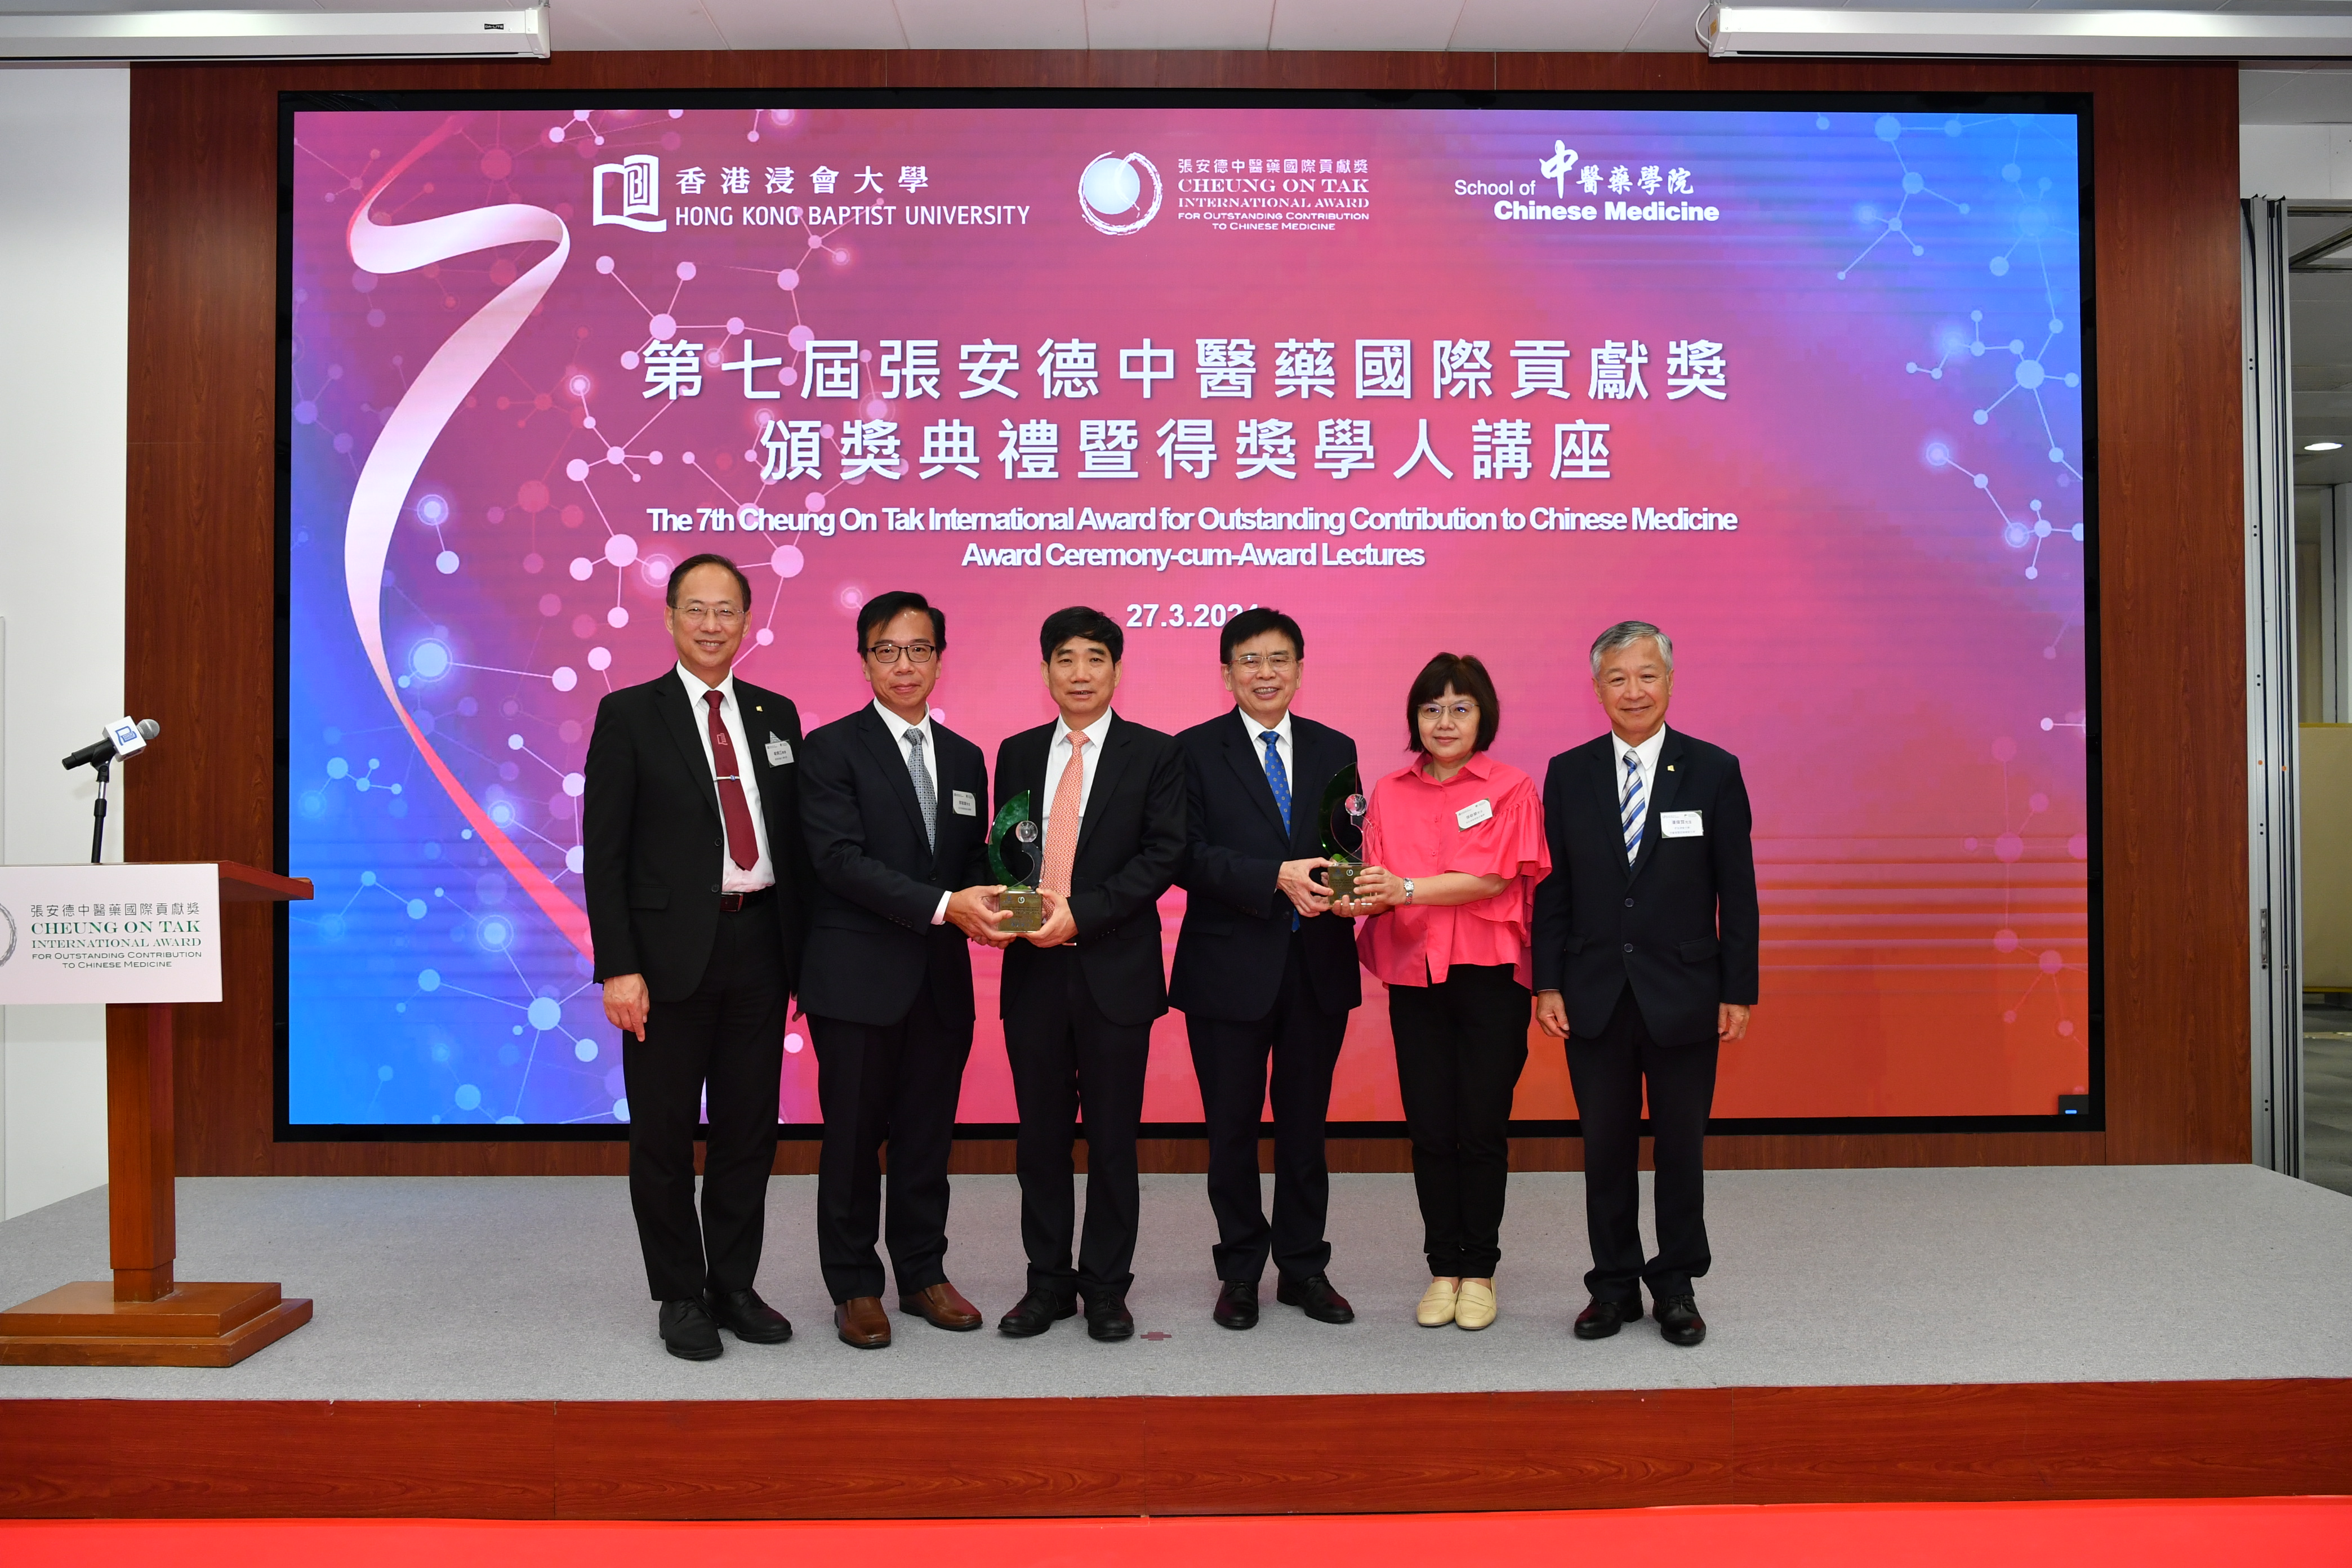 Spotlight: The Seventh Cheung On Tak International Award for Outstanding Contribution to Chinese Medicine conferred on Academician Liu Liang and Professor Xu Anlong